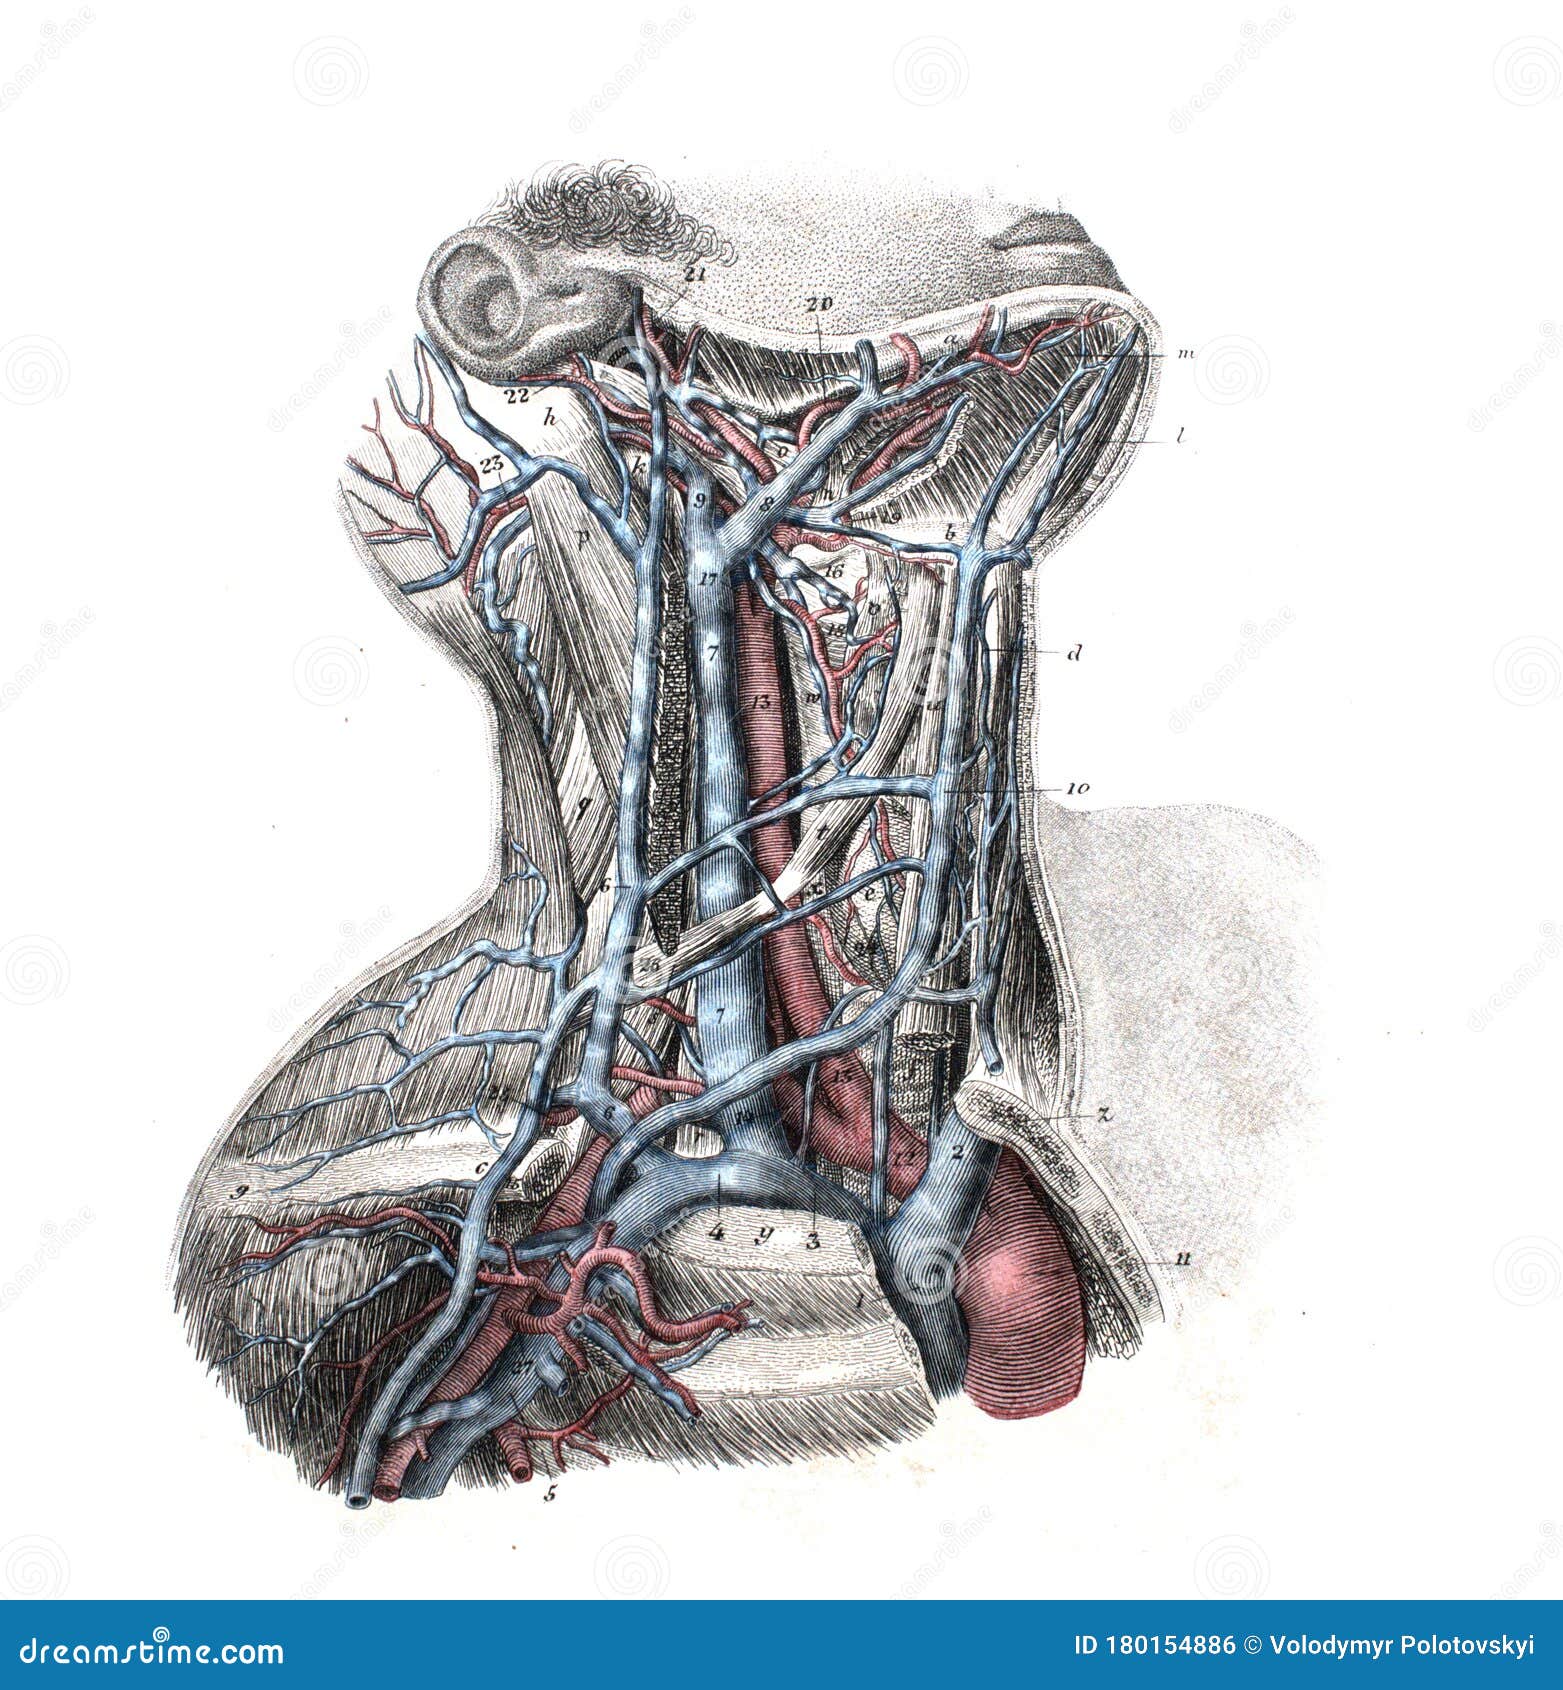 Veins And Arteries On The Neck In The Old Book The Atlas Of Human